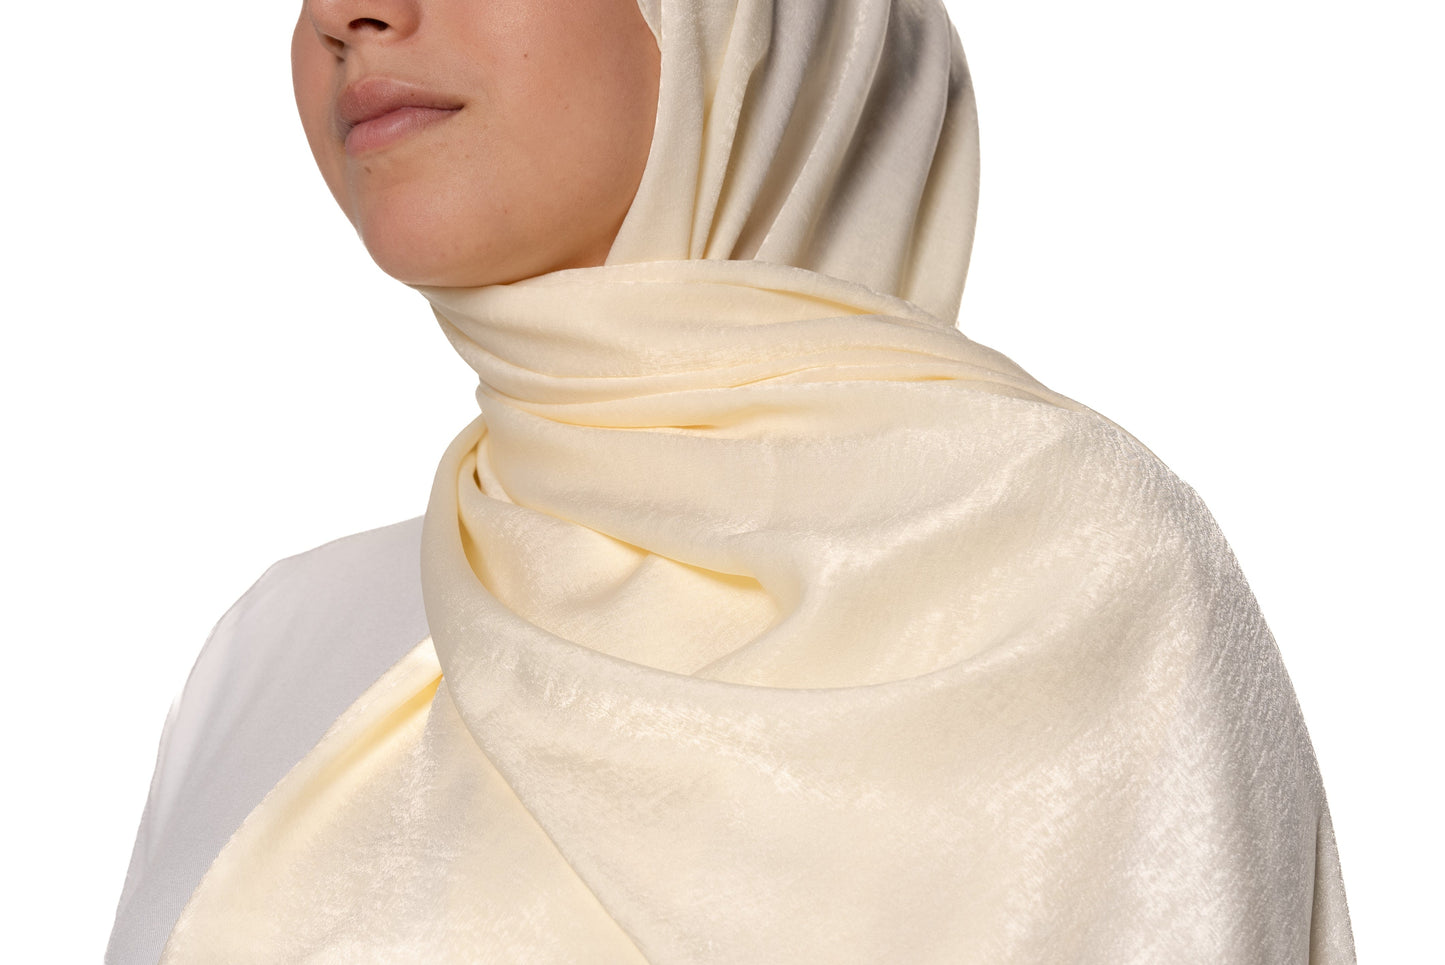 Jolie Nisa Hijab Feel Luxurious and Elegant with Jolie Nisa Velvet Crushed Silk Satin Hijab - Maxi Size, Mid-Weight, Ripple Grain Texture Shop Jolie Nisa Velvet Crushed Silk Satin Hijab - Luxuriously Soft & Chic